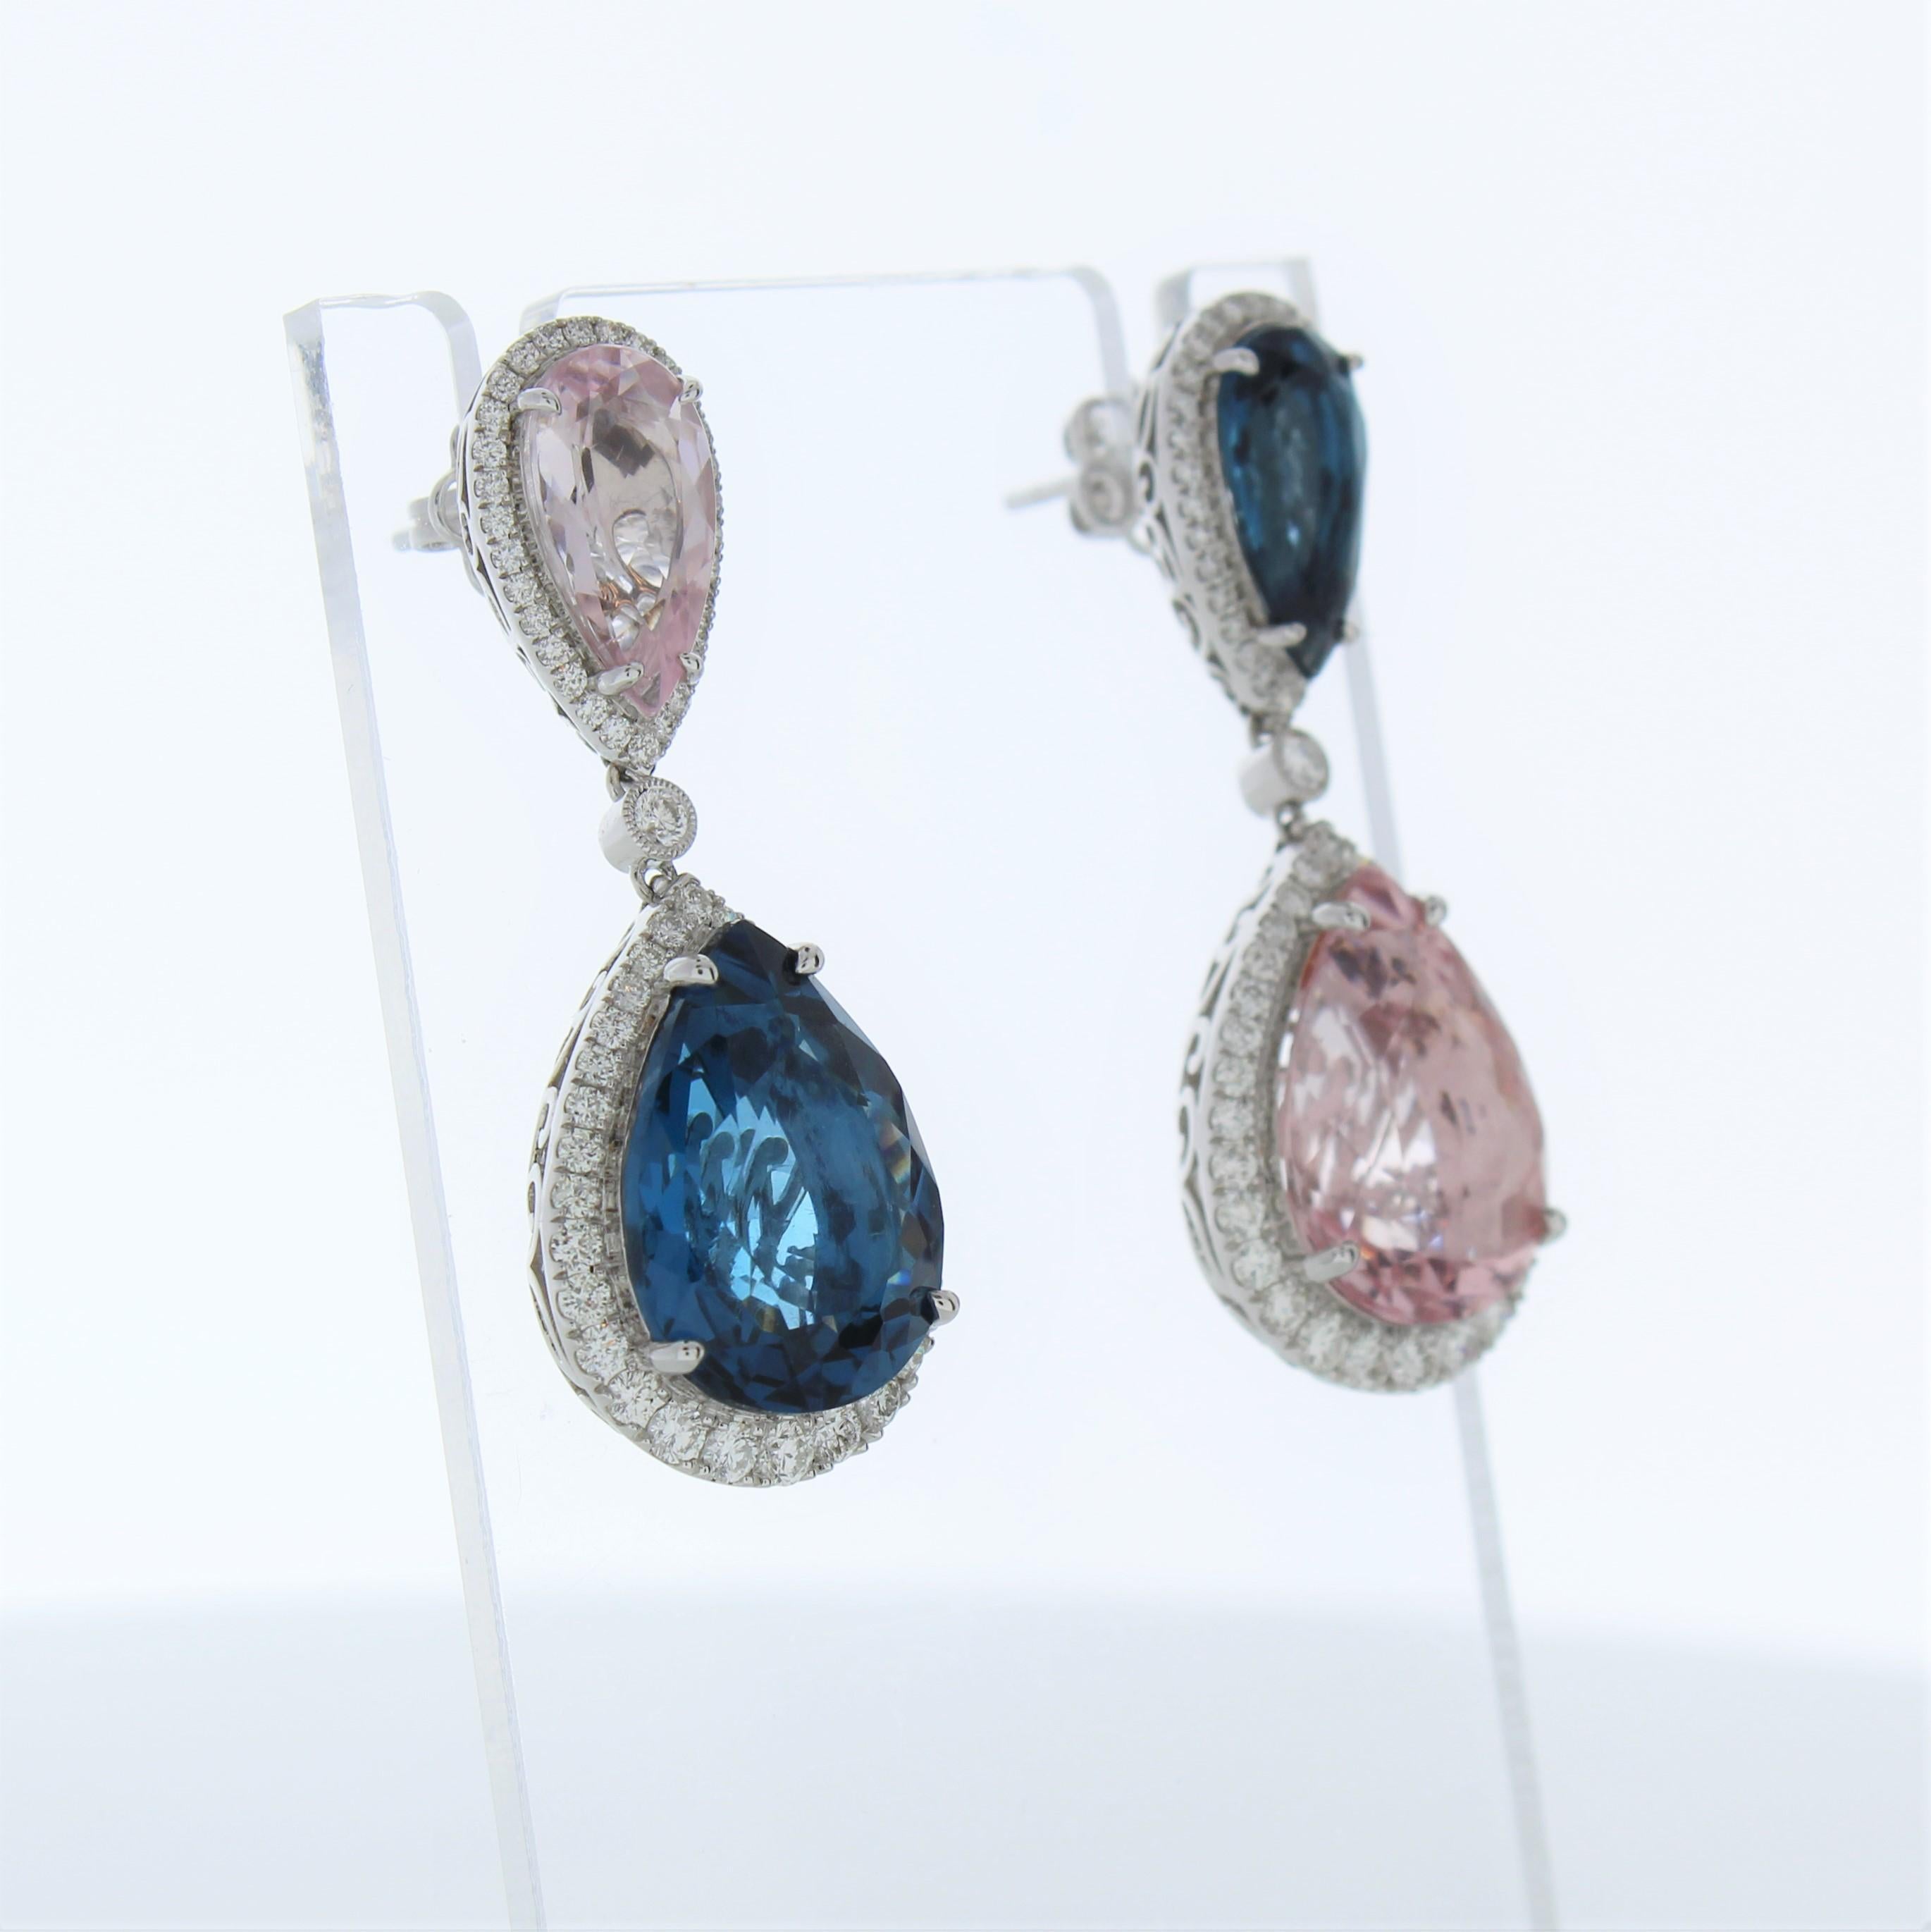 The fashion earrings feature two pear-cut blue topaz gemstones, each weighing a total of 14.82 carats, set in 14 karat white gold. They are further accented by a total of 244 round-cut diamonds with a combined weight of 1.57 carats in both earrings.